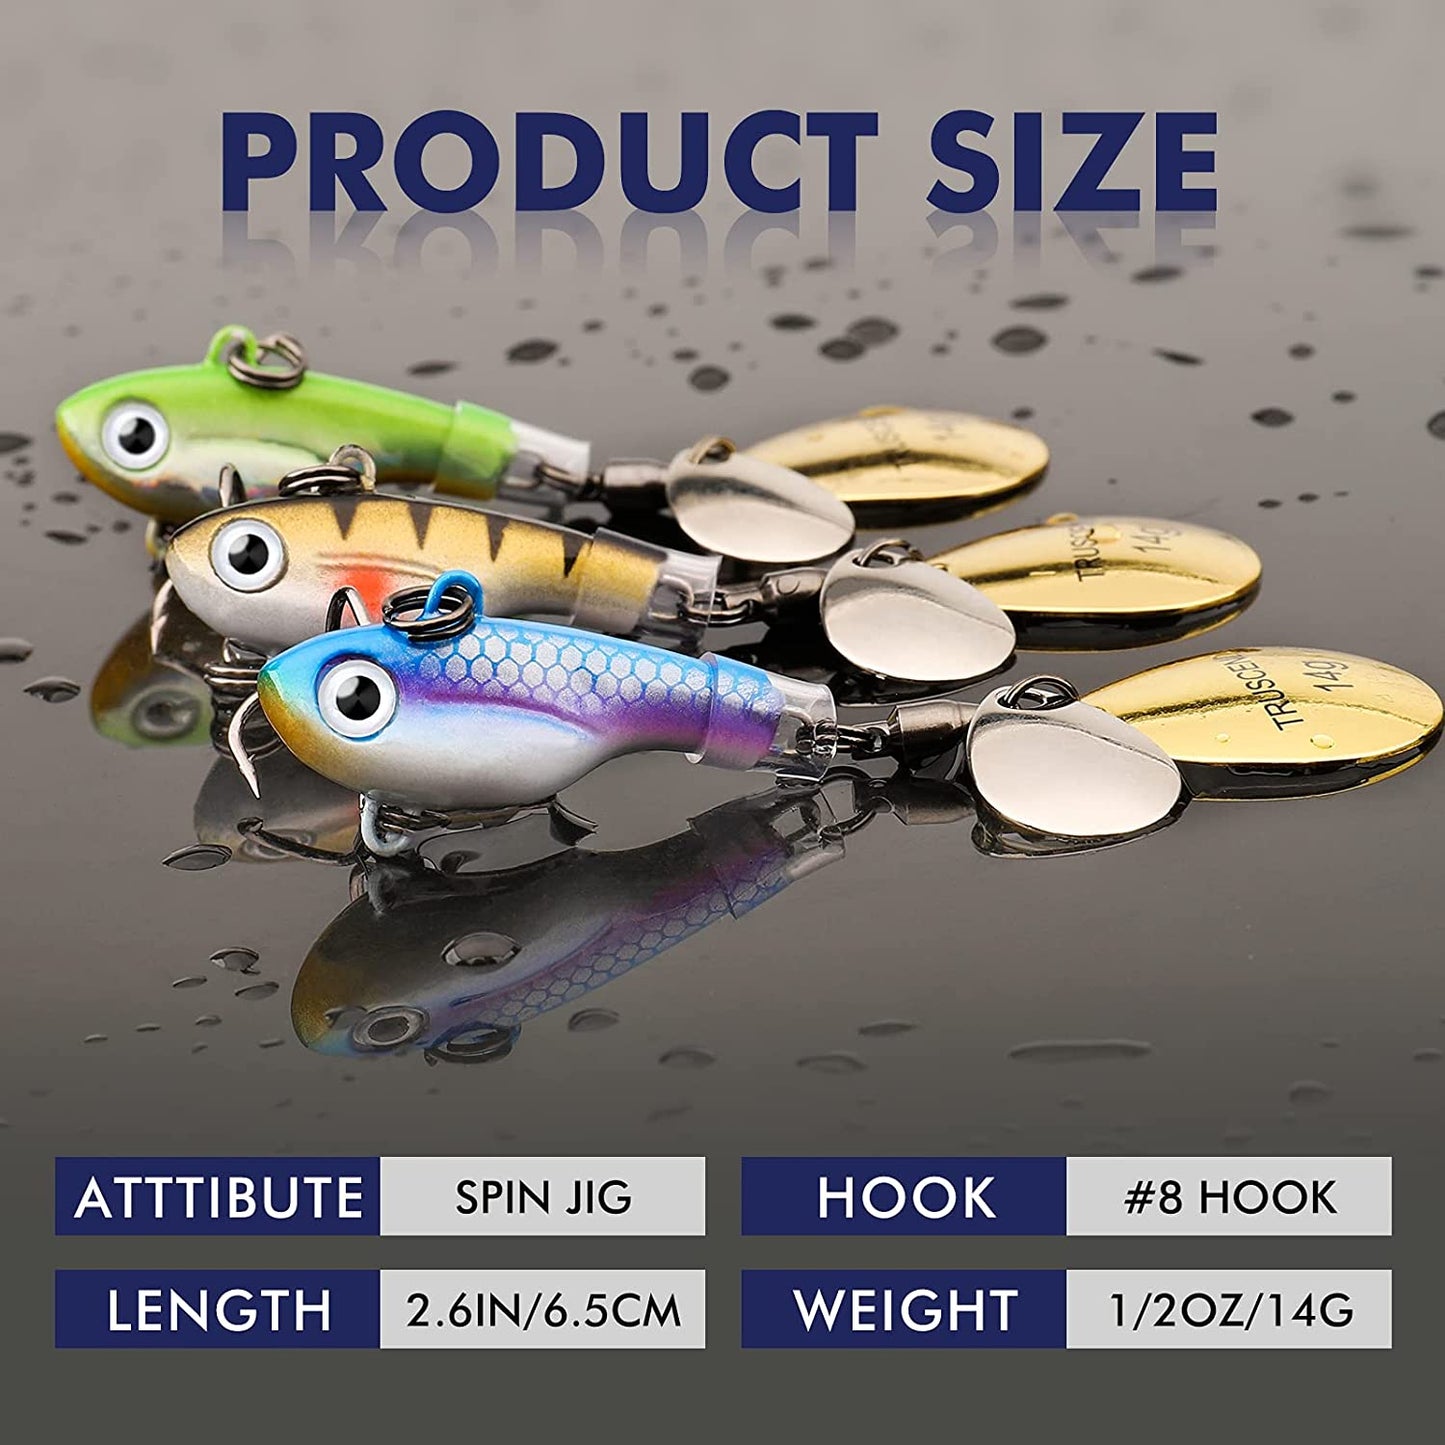 Fishing Spinner Baits with Triple Strengthened Hook, Copper Blade, High Grade Biological Rooster Tail, Long Casting Fishing Lures for Bass Trout Crappie, Fishing Jigs for Freshwater Saltwater